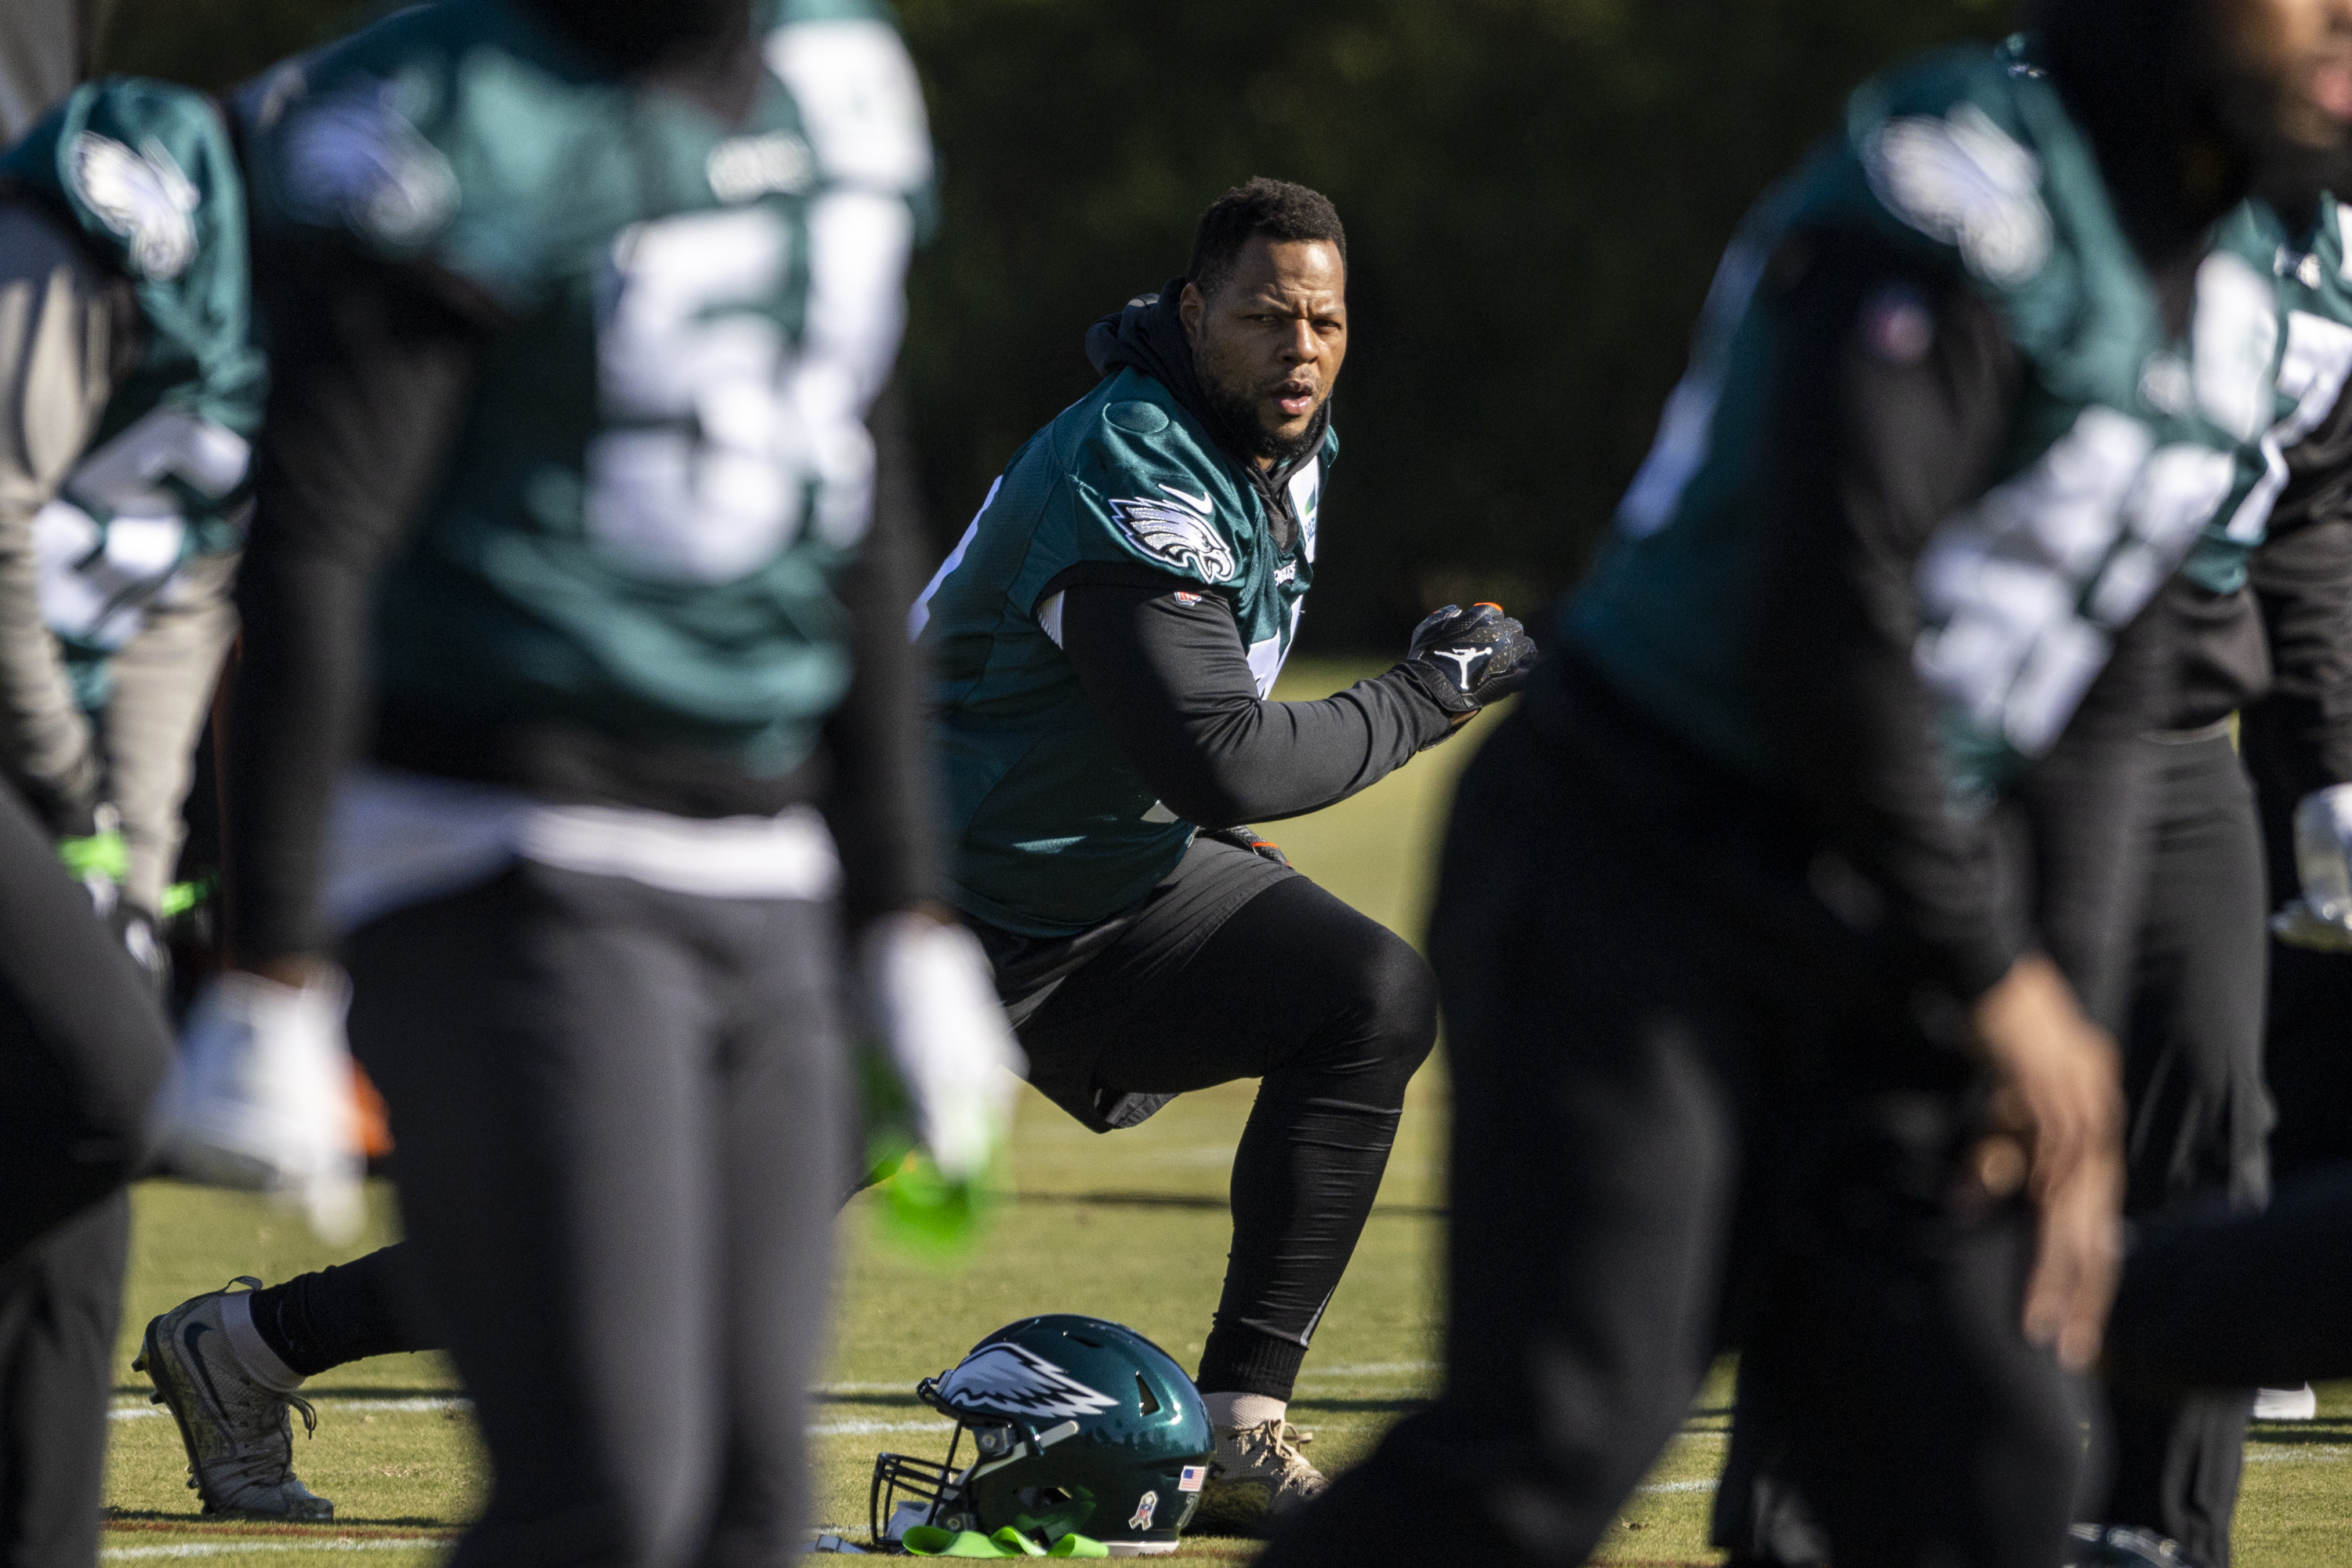 Ndamukong Suh sees an opportunity to win a championship with the Eagles